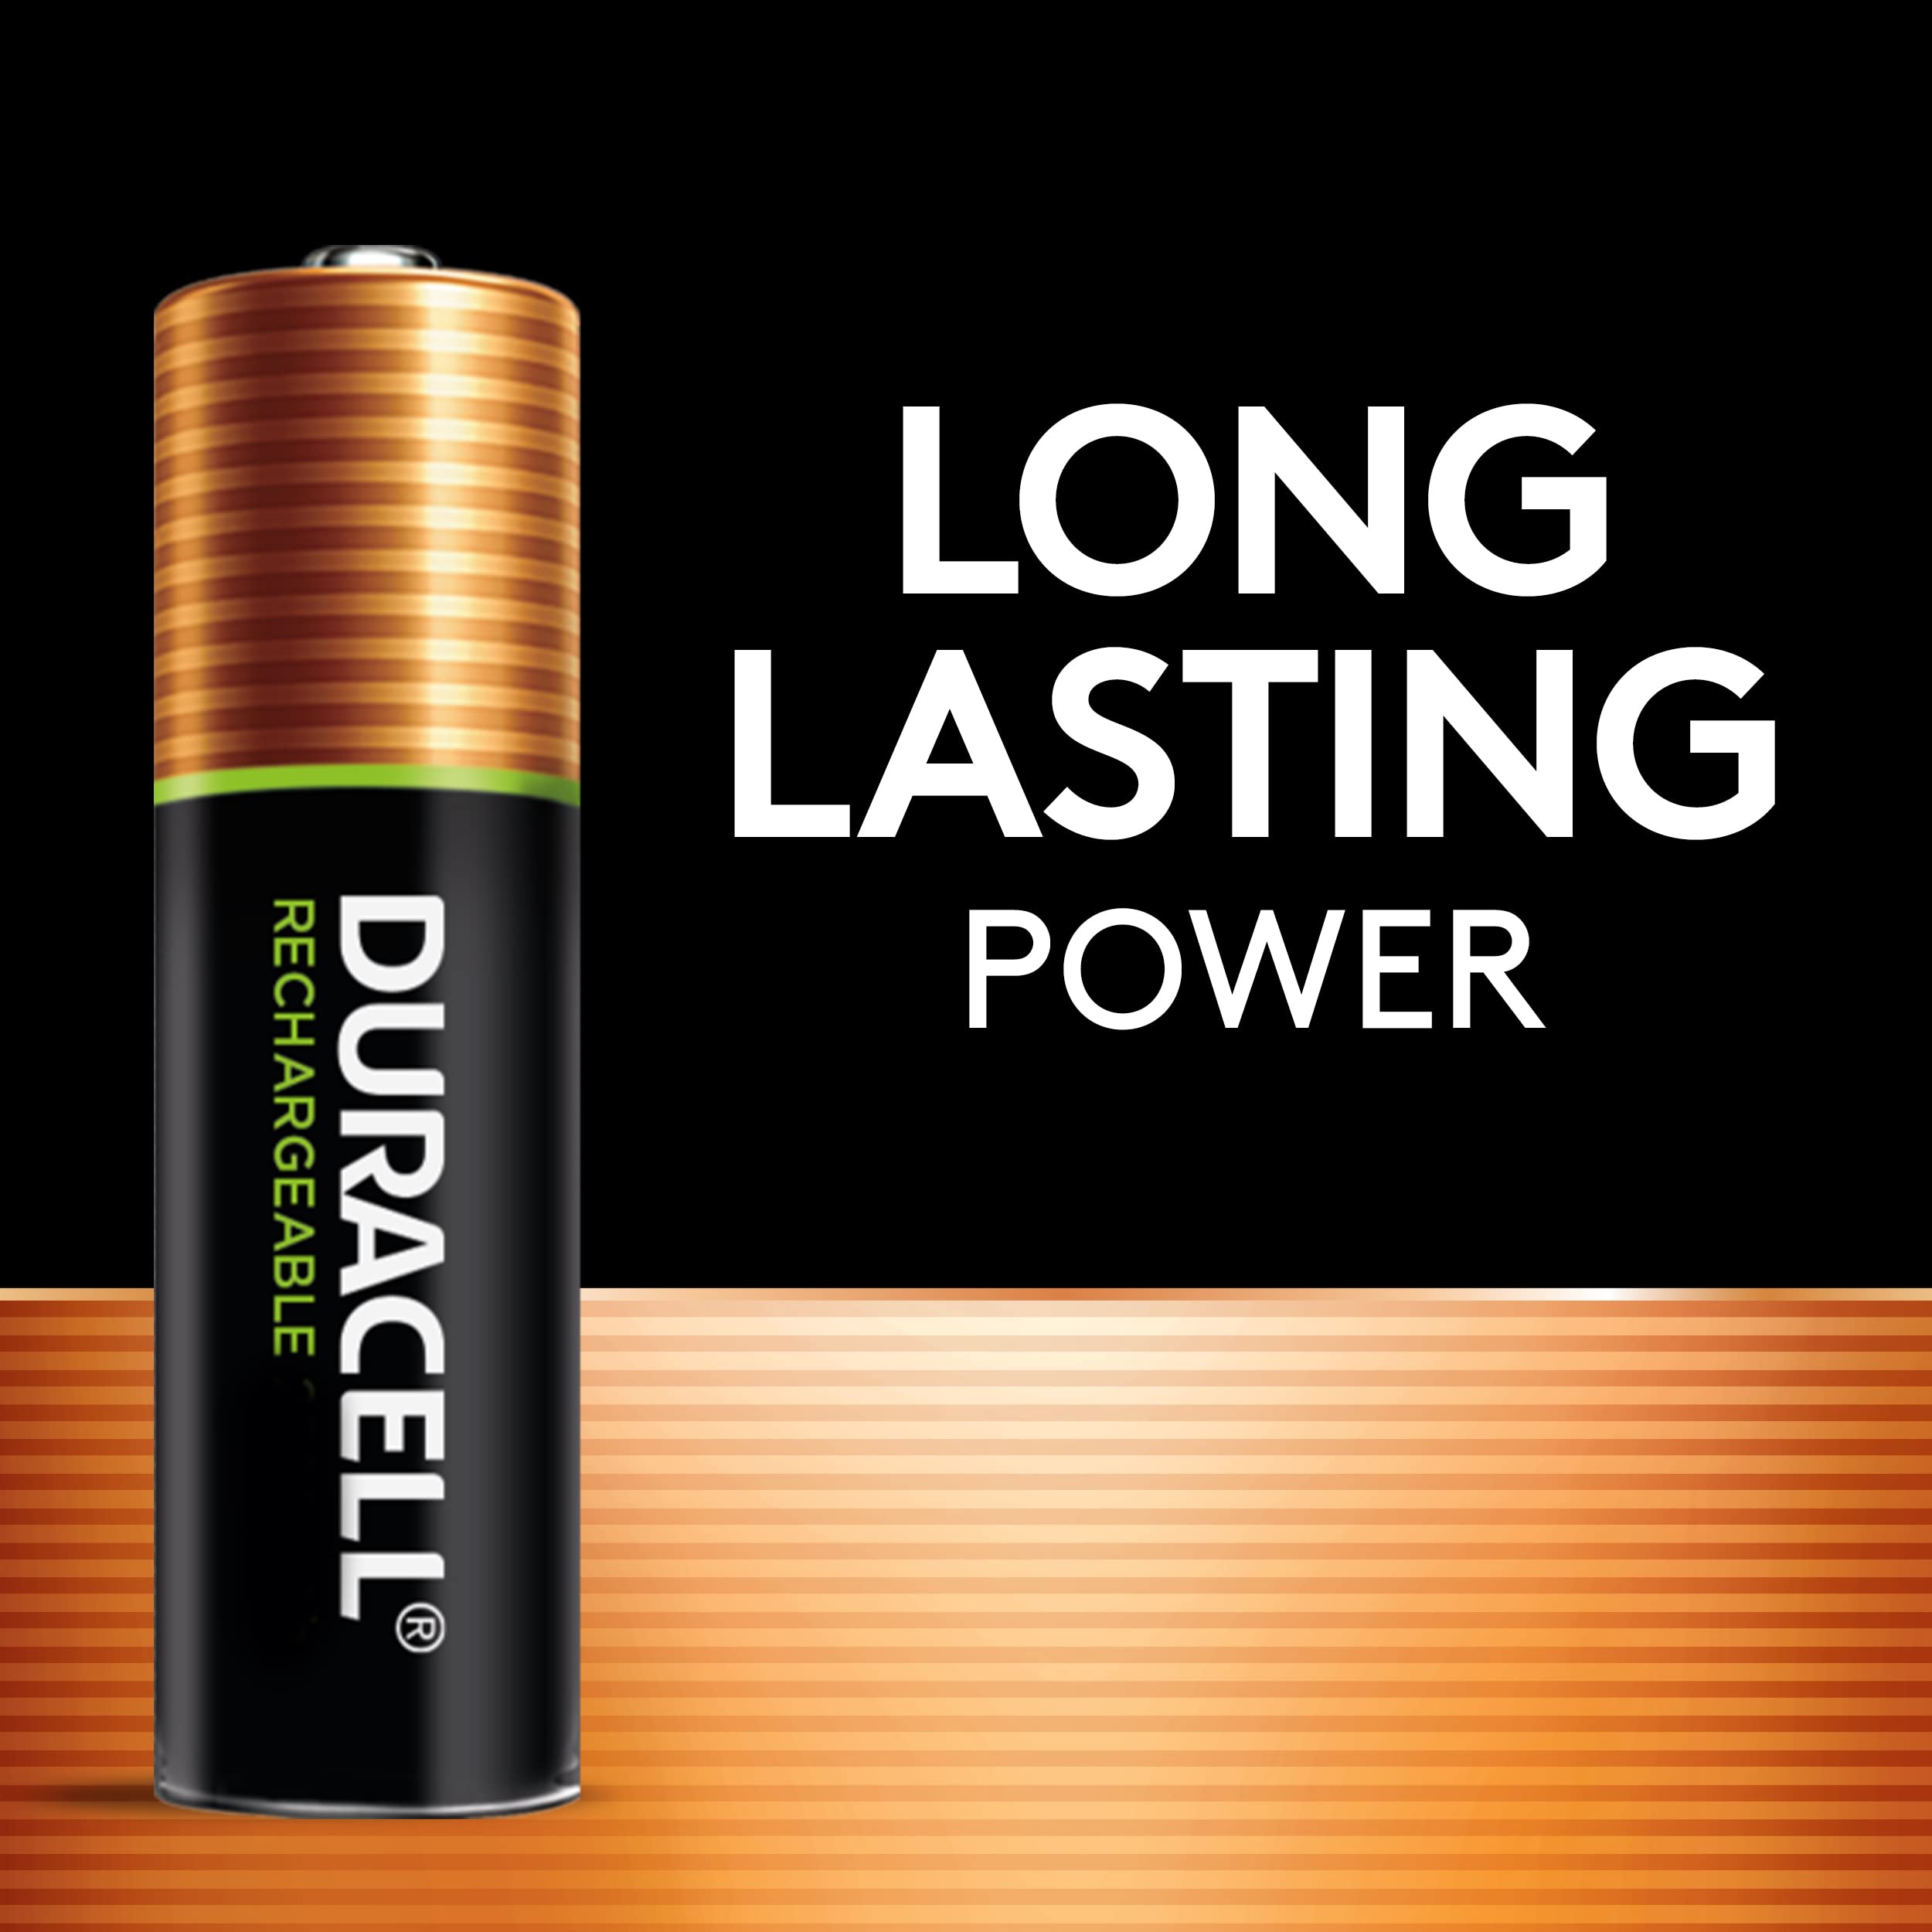 Duracell Rechargeable AAA Batteries, 2 Count Pack, Triple A Battery for Long-lasting Power, All-Purpose Pre-Charged Battery for Household and Business Devices